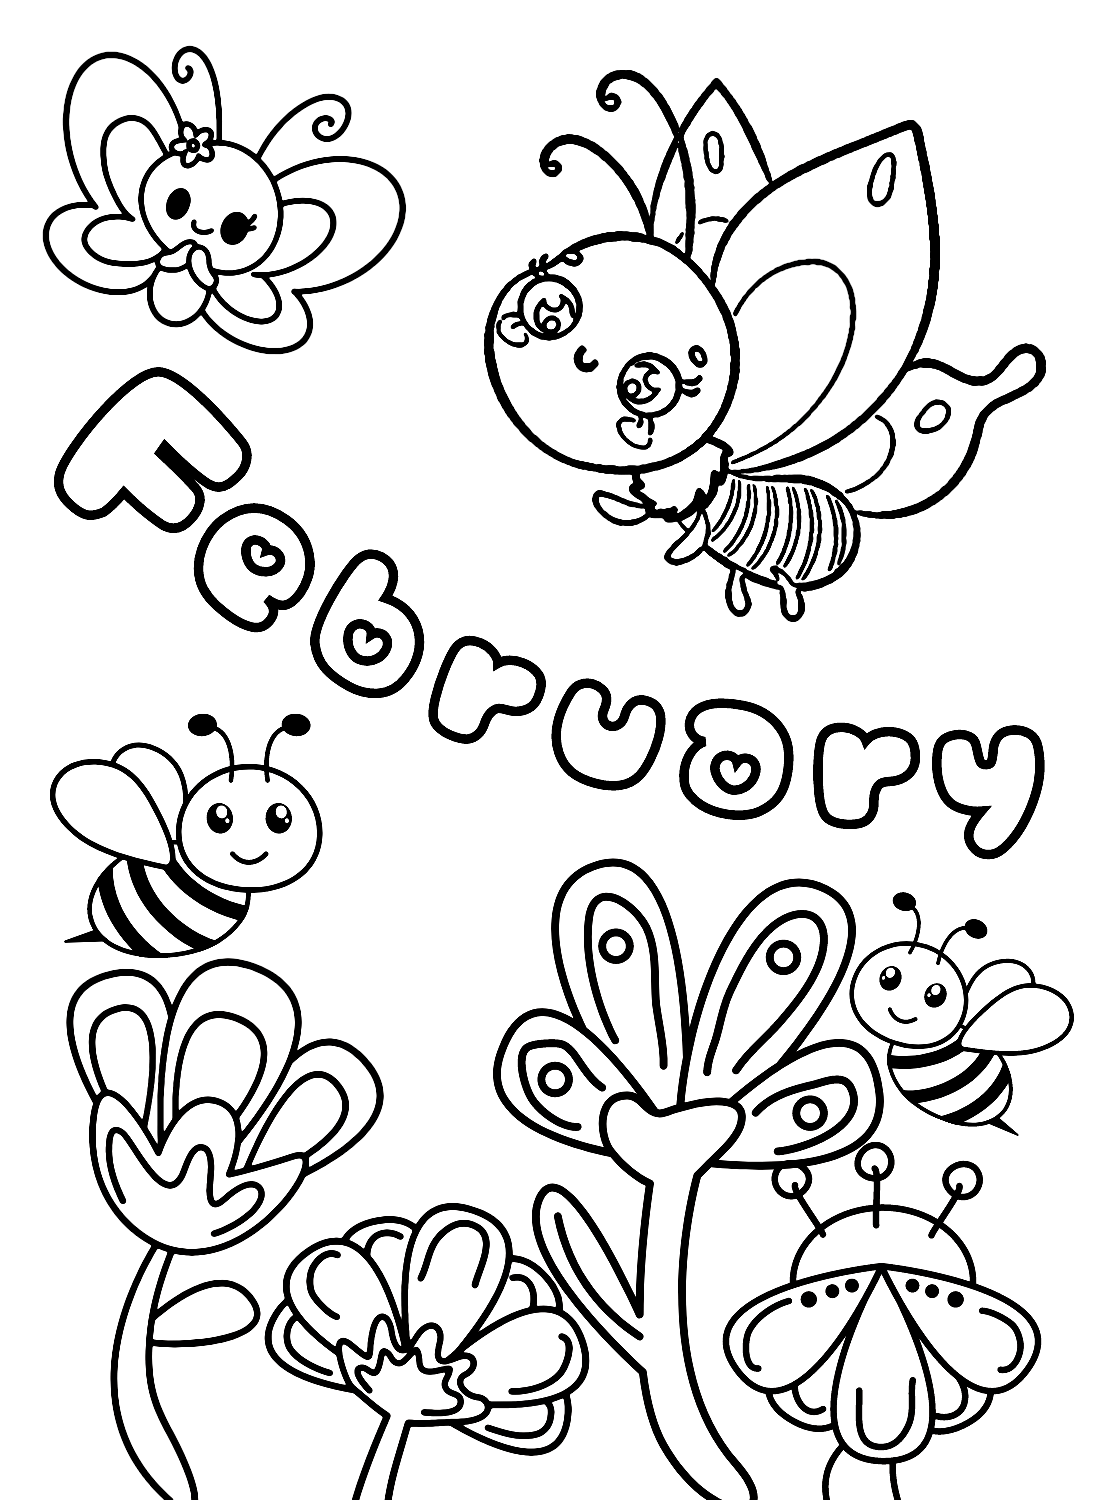 February with Flowers and Bees from February 2024